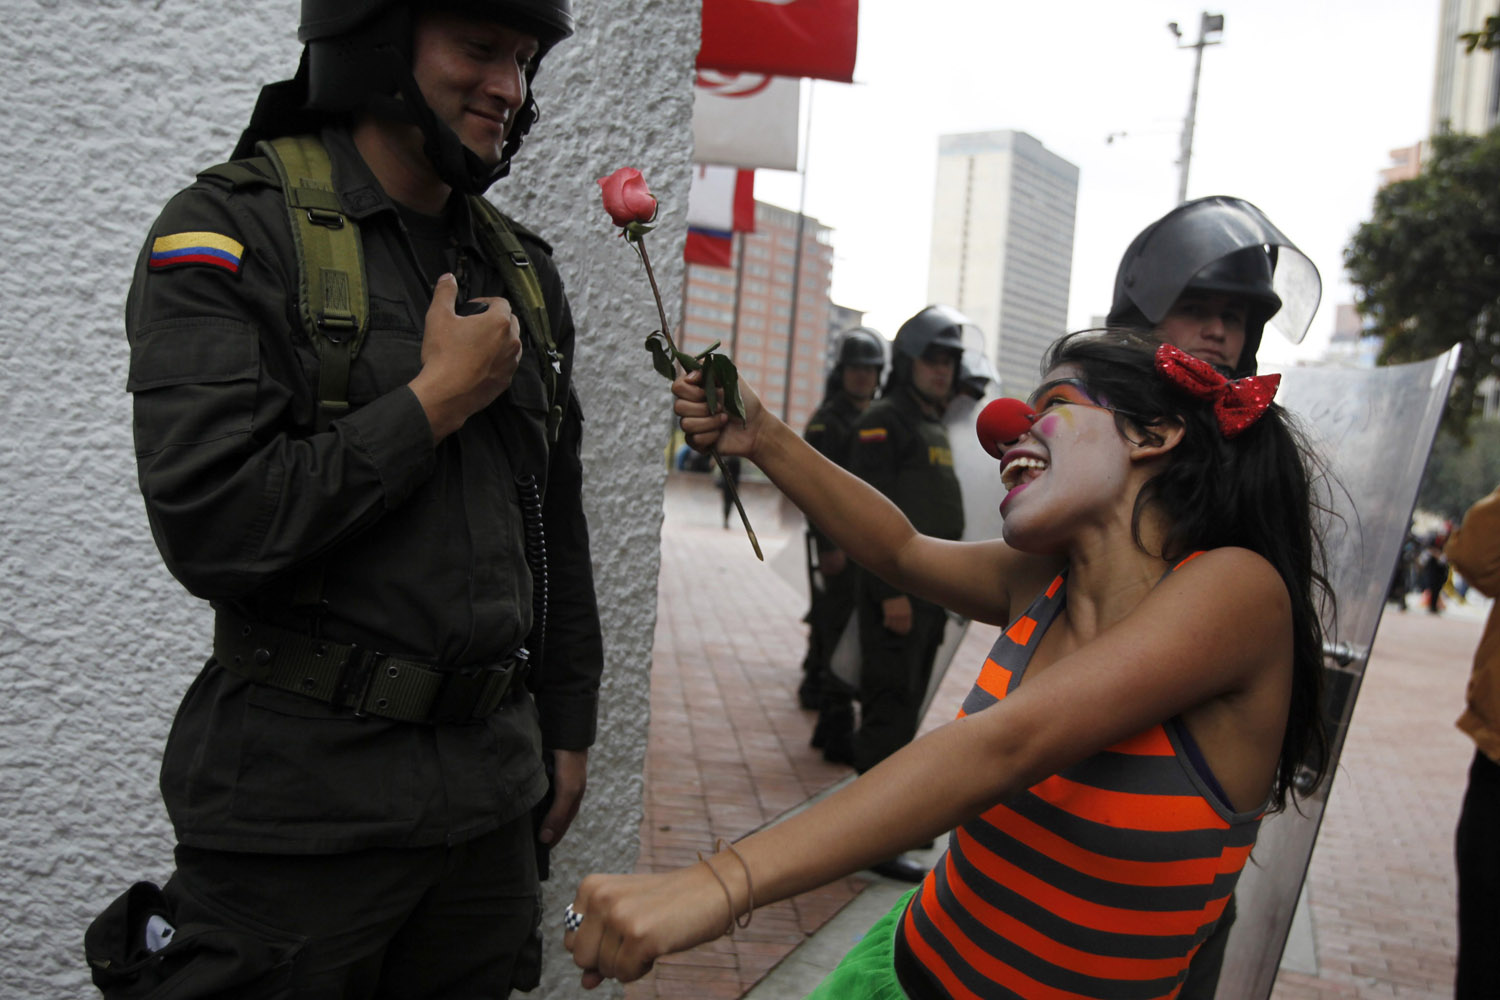 A student gestures with a flower to a policeman as she marches during the closing ceremony of the "Congress for Peace" in Bogota